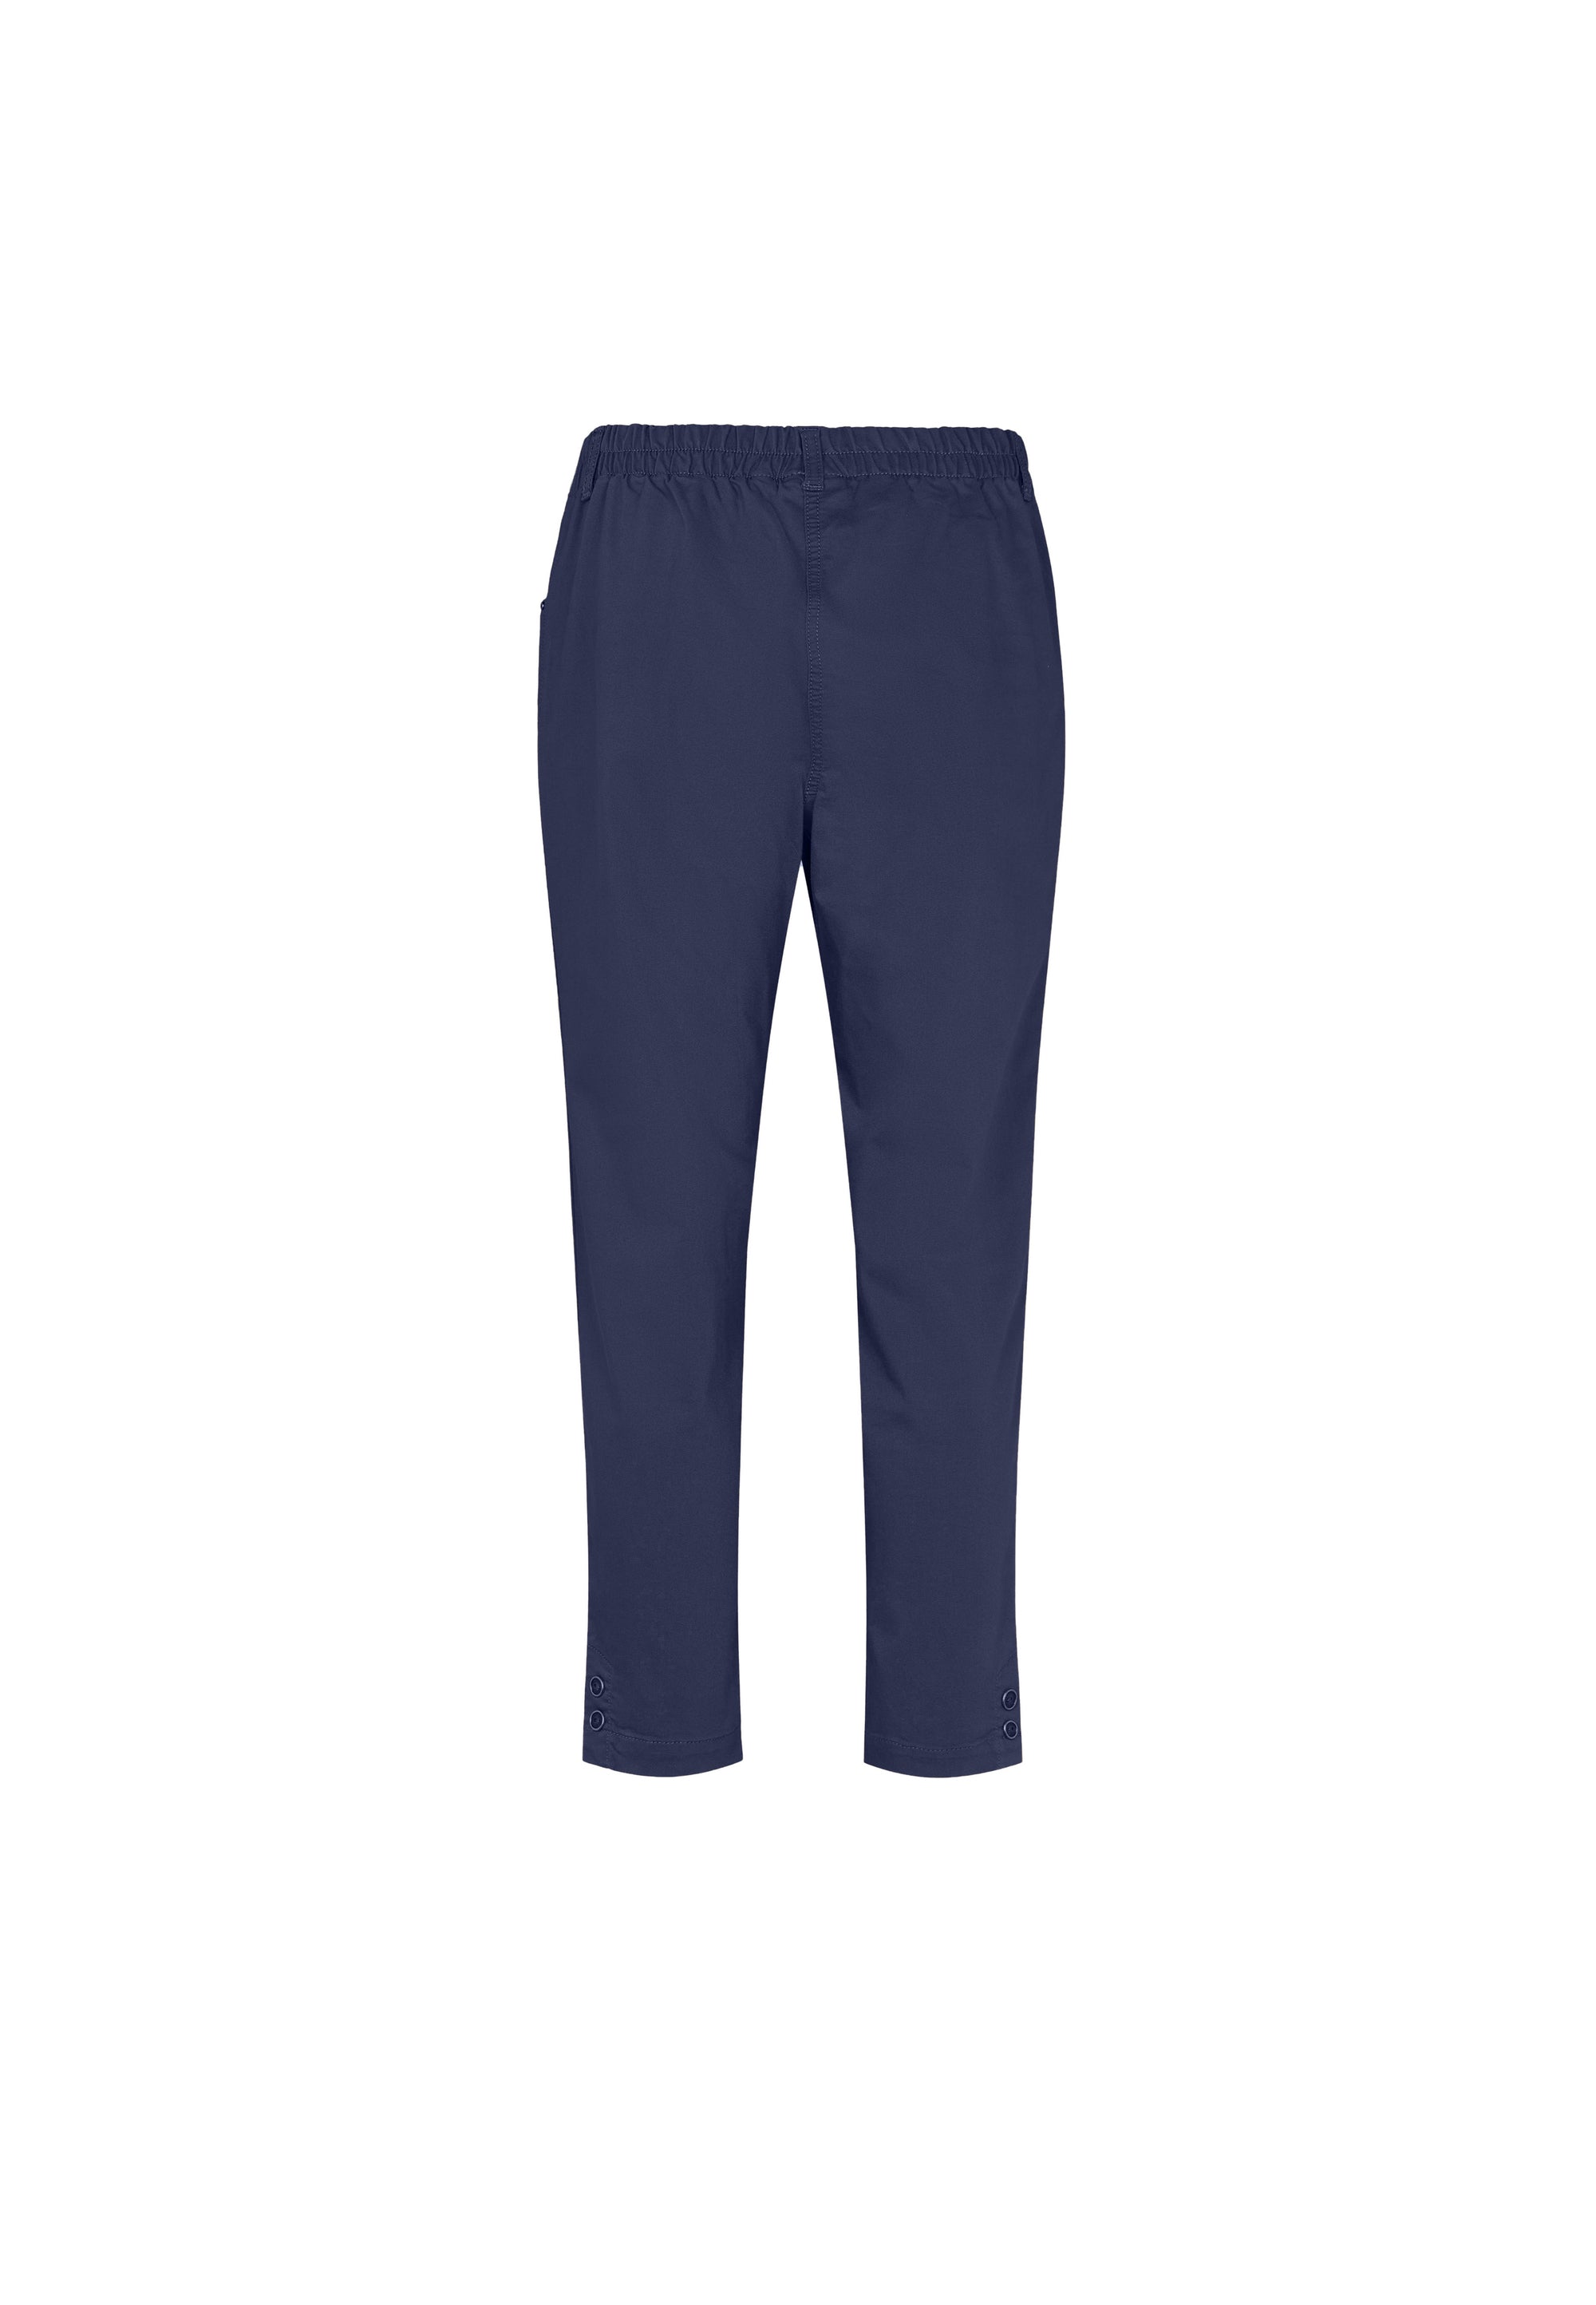 LAURIE  Ellie Relaxed - Extra Short Length Trousers RELAXED 49200 Navy